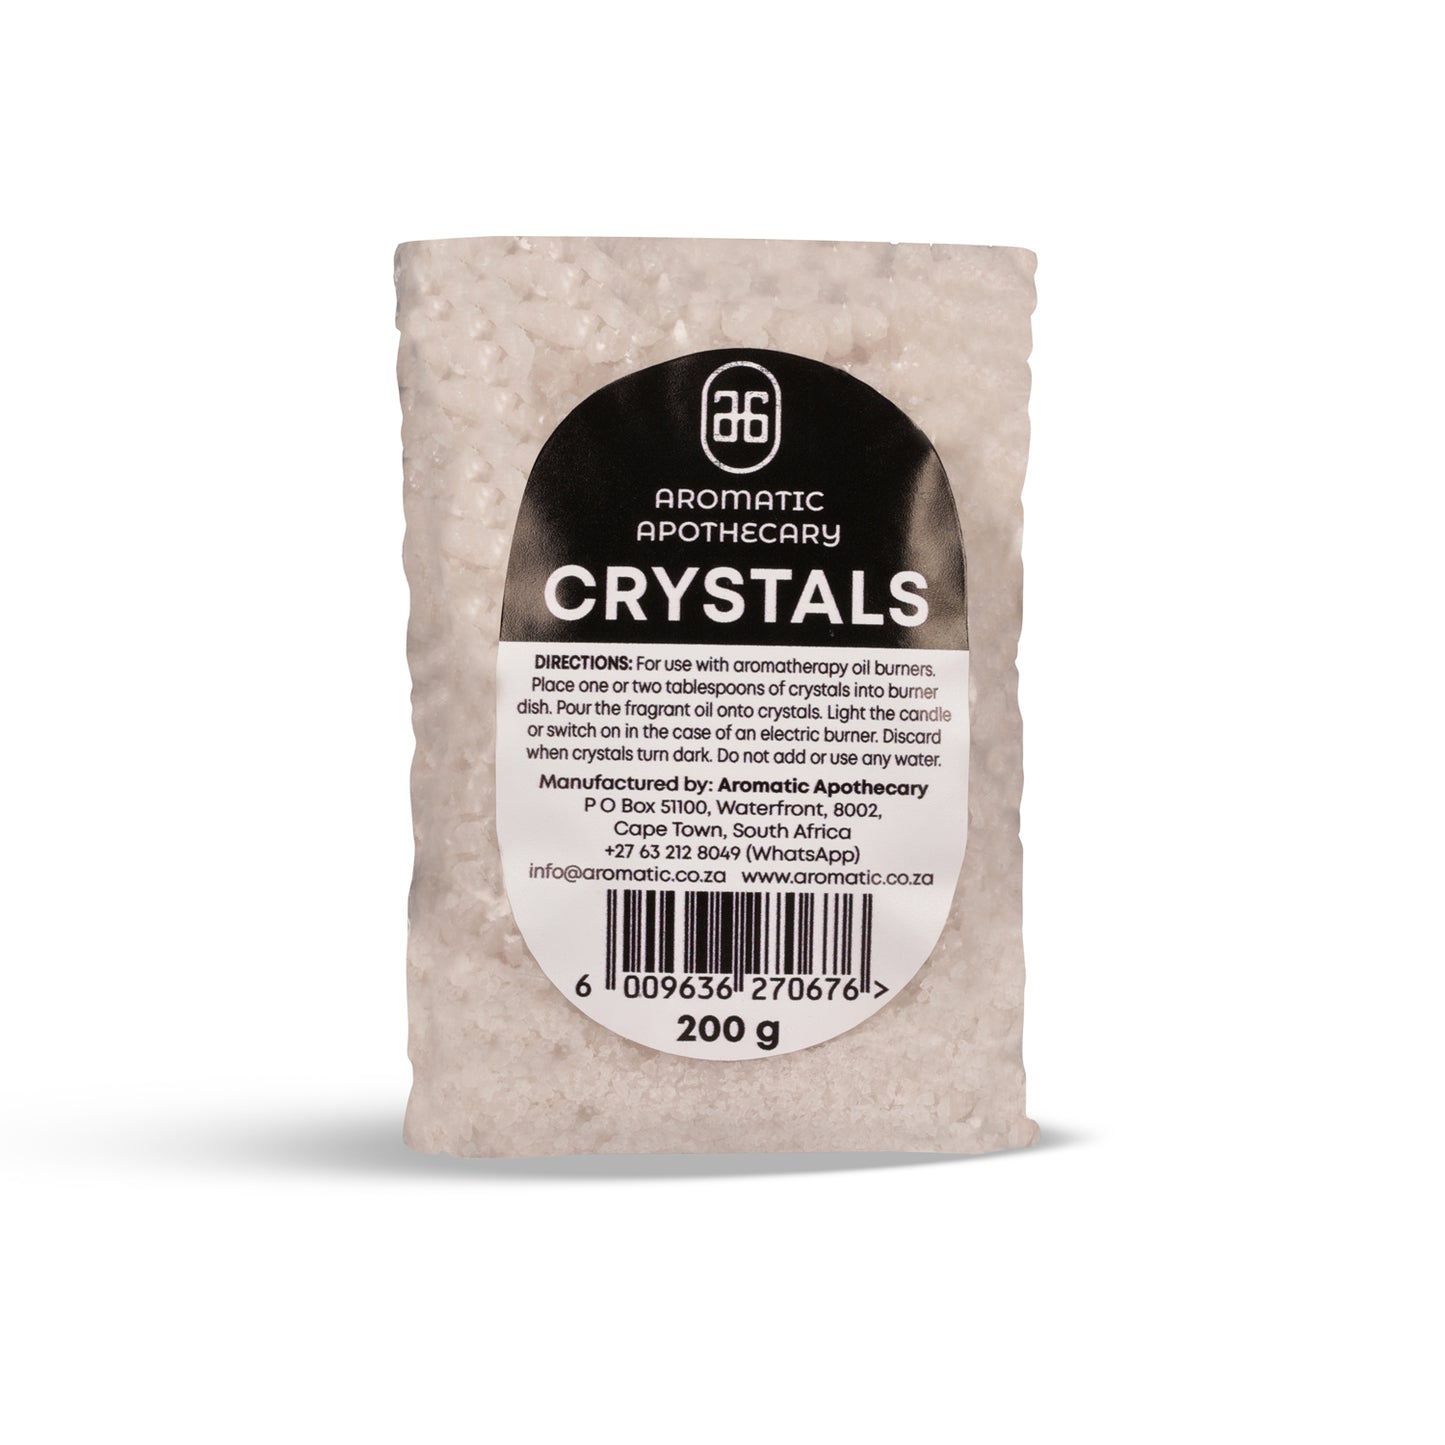 Aromatic Apothecary - Crystals 200g